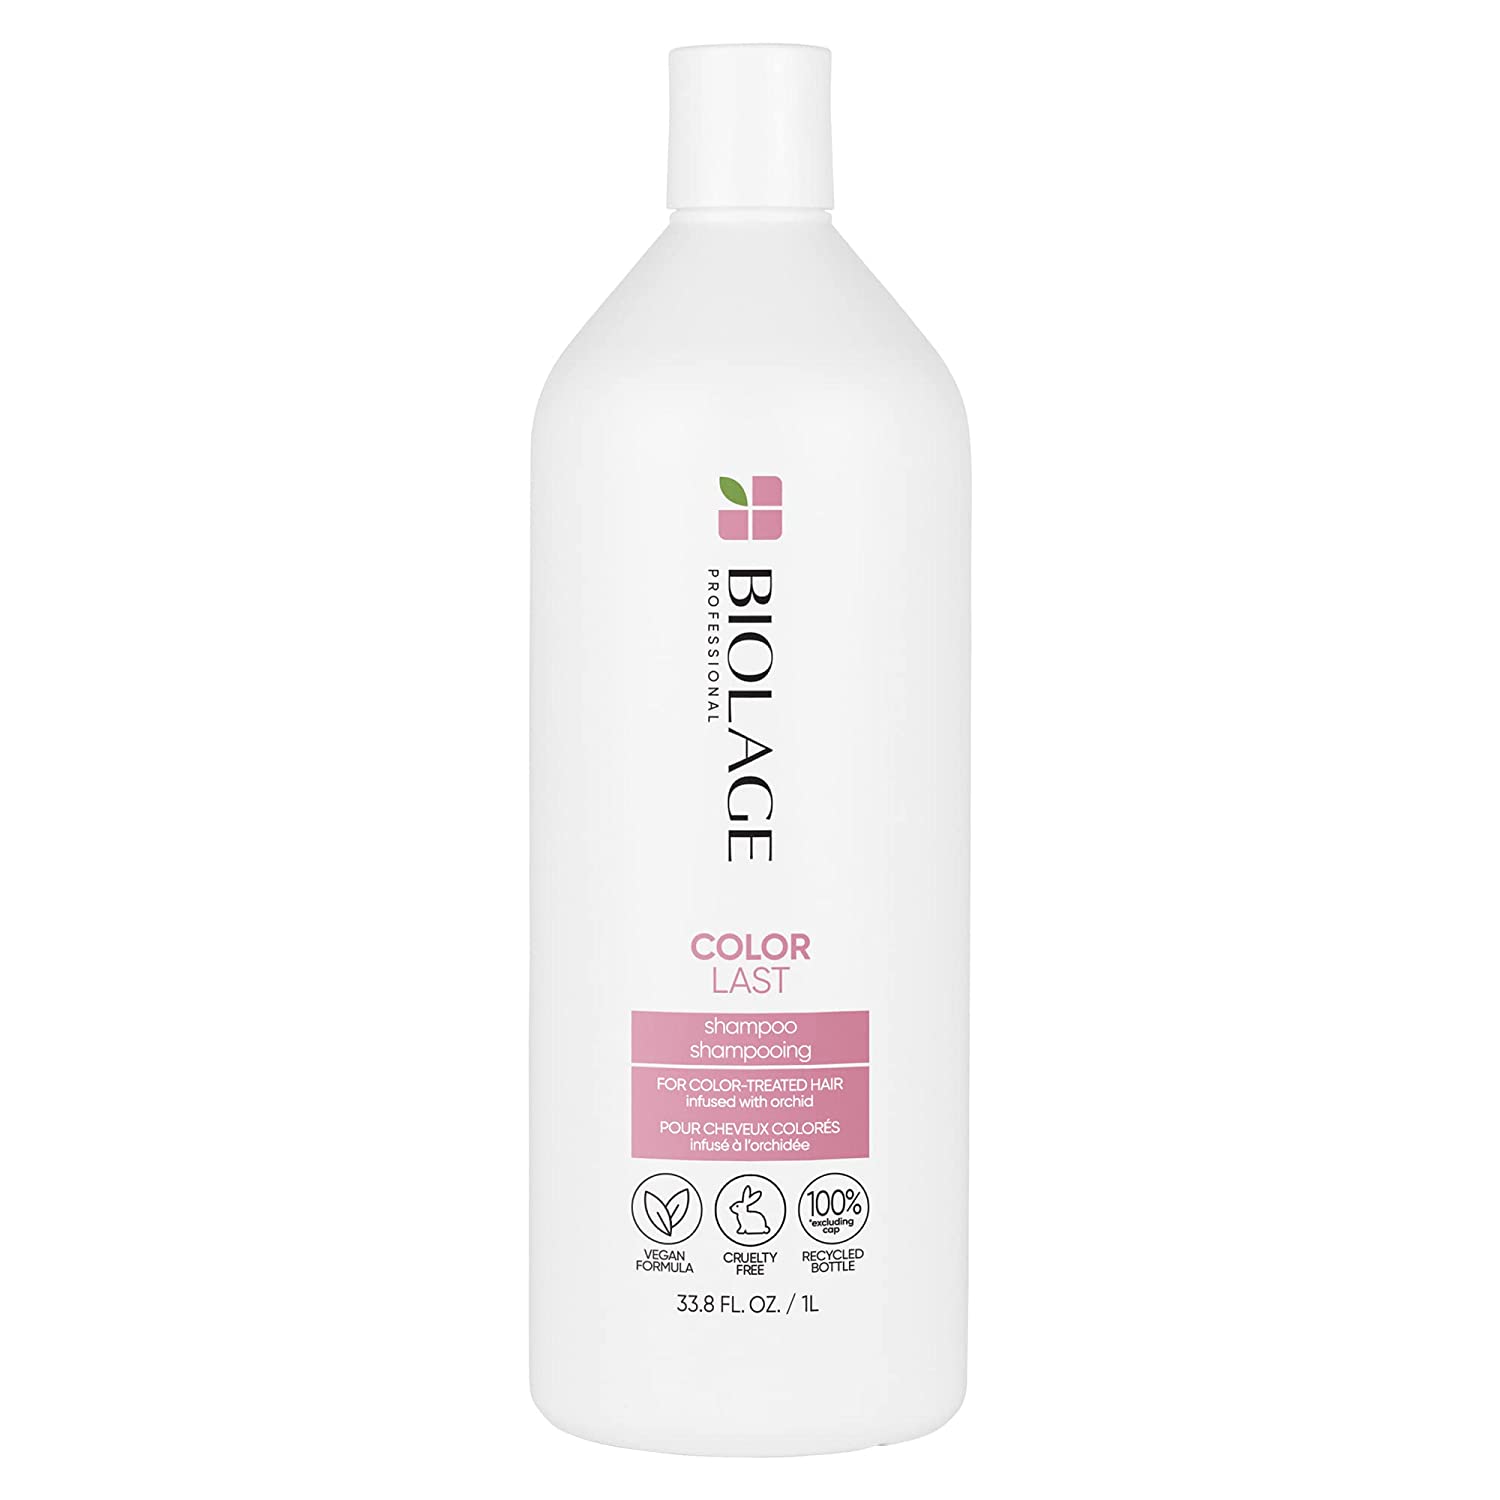 shampoo for dark colored hair review